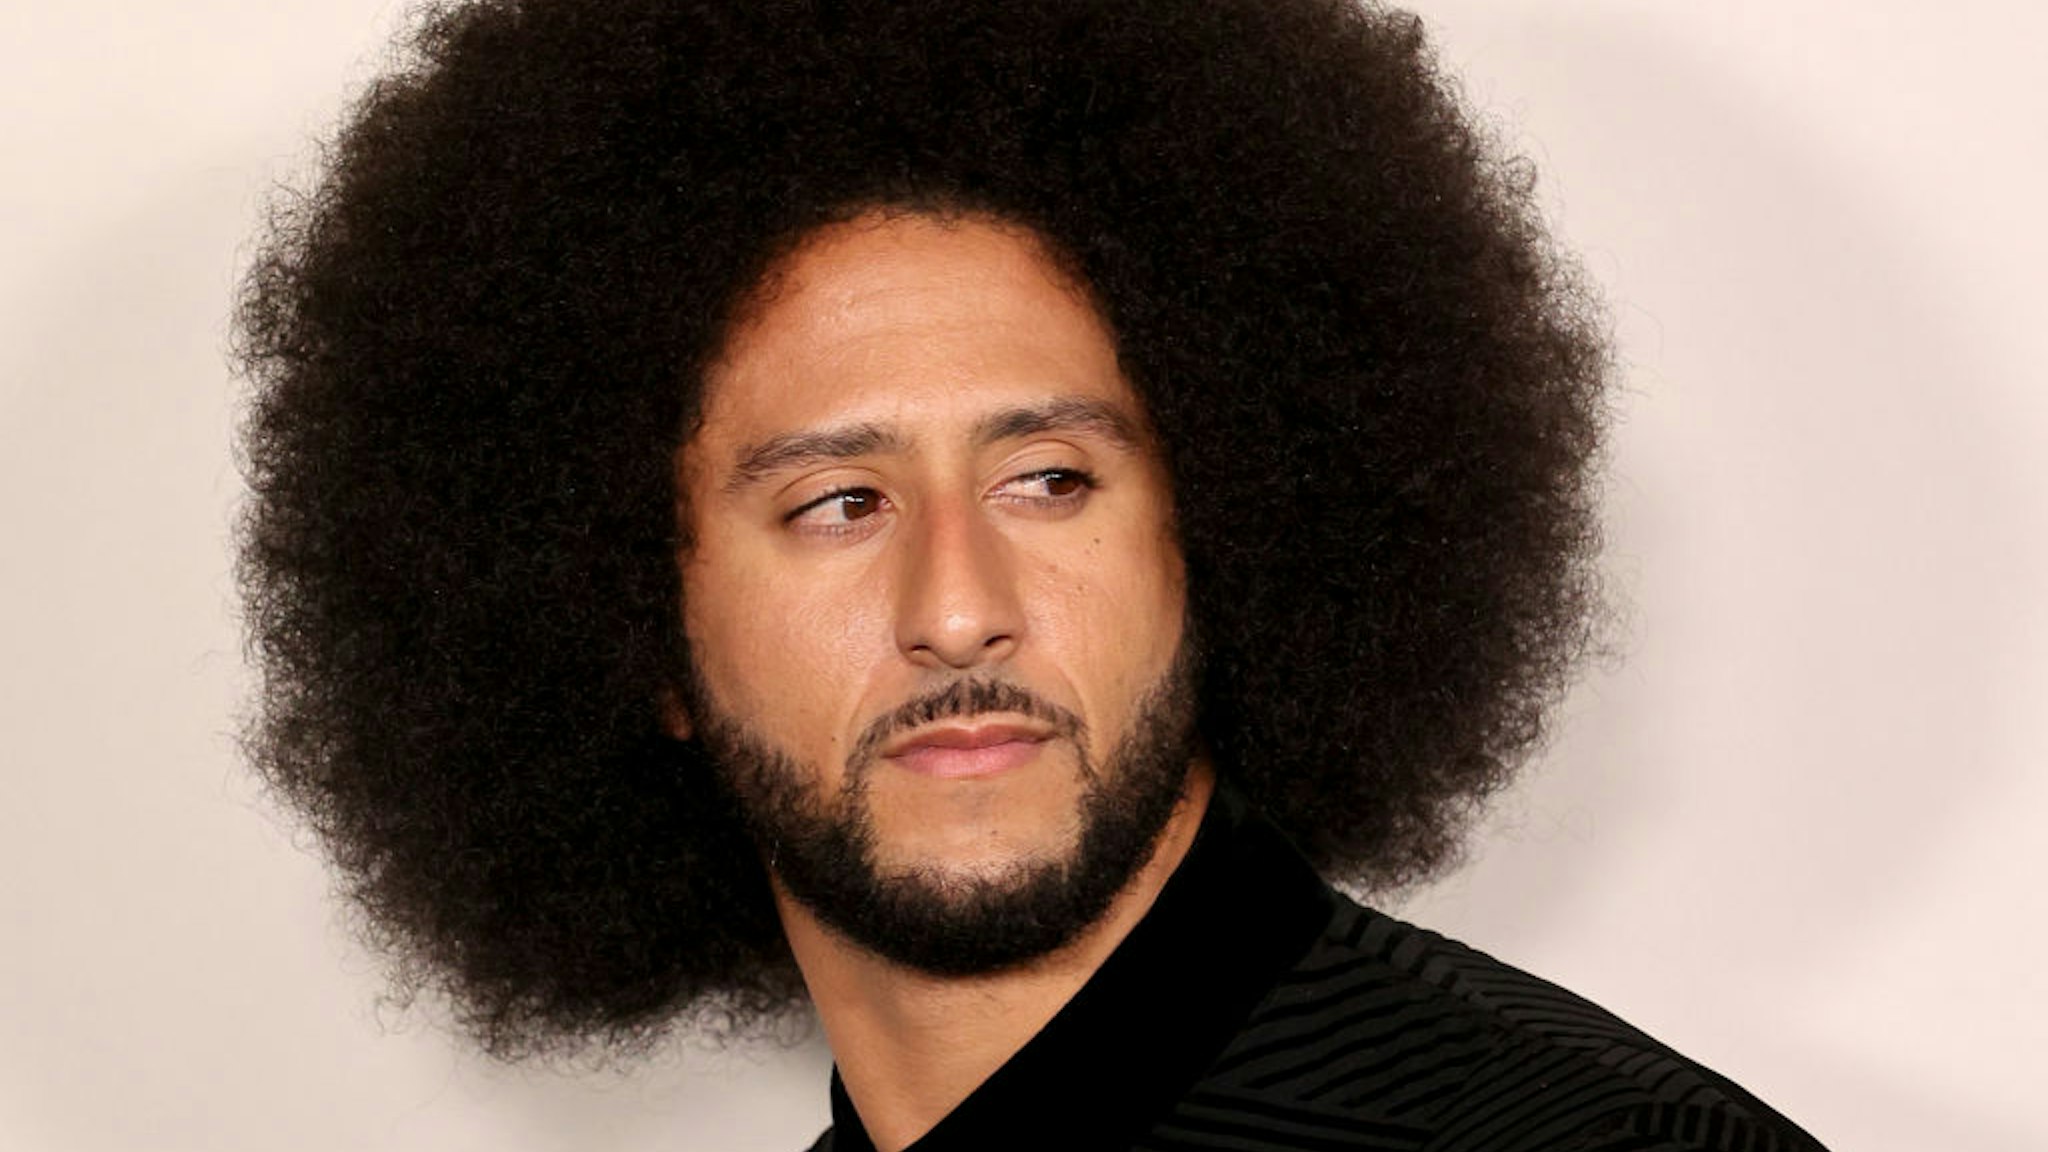 Colin Kaepernick arrives at the Los Angeles premiere of Netflix's "Colin In Black And White" at Academy Museum of Motion Pictures on October 28, 2021 in Los Angeles, California.